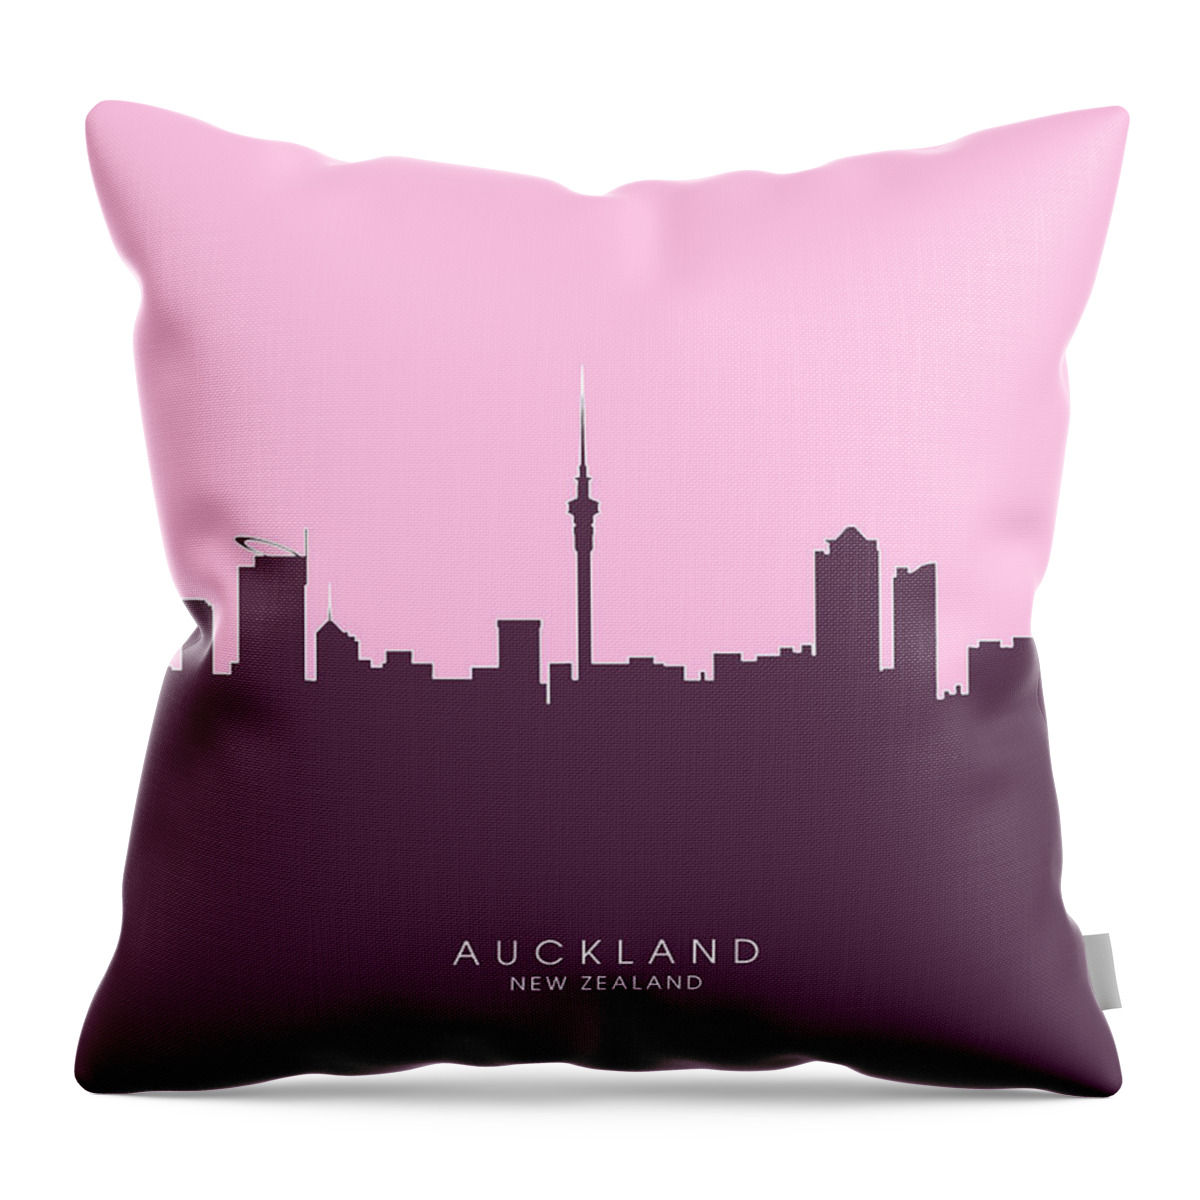 United States Throw Pillow featuring the digital art Auckland New Zealand Skyline by Michael Tompsett